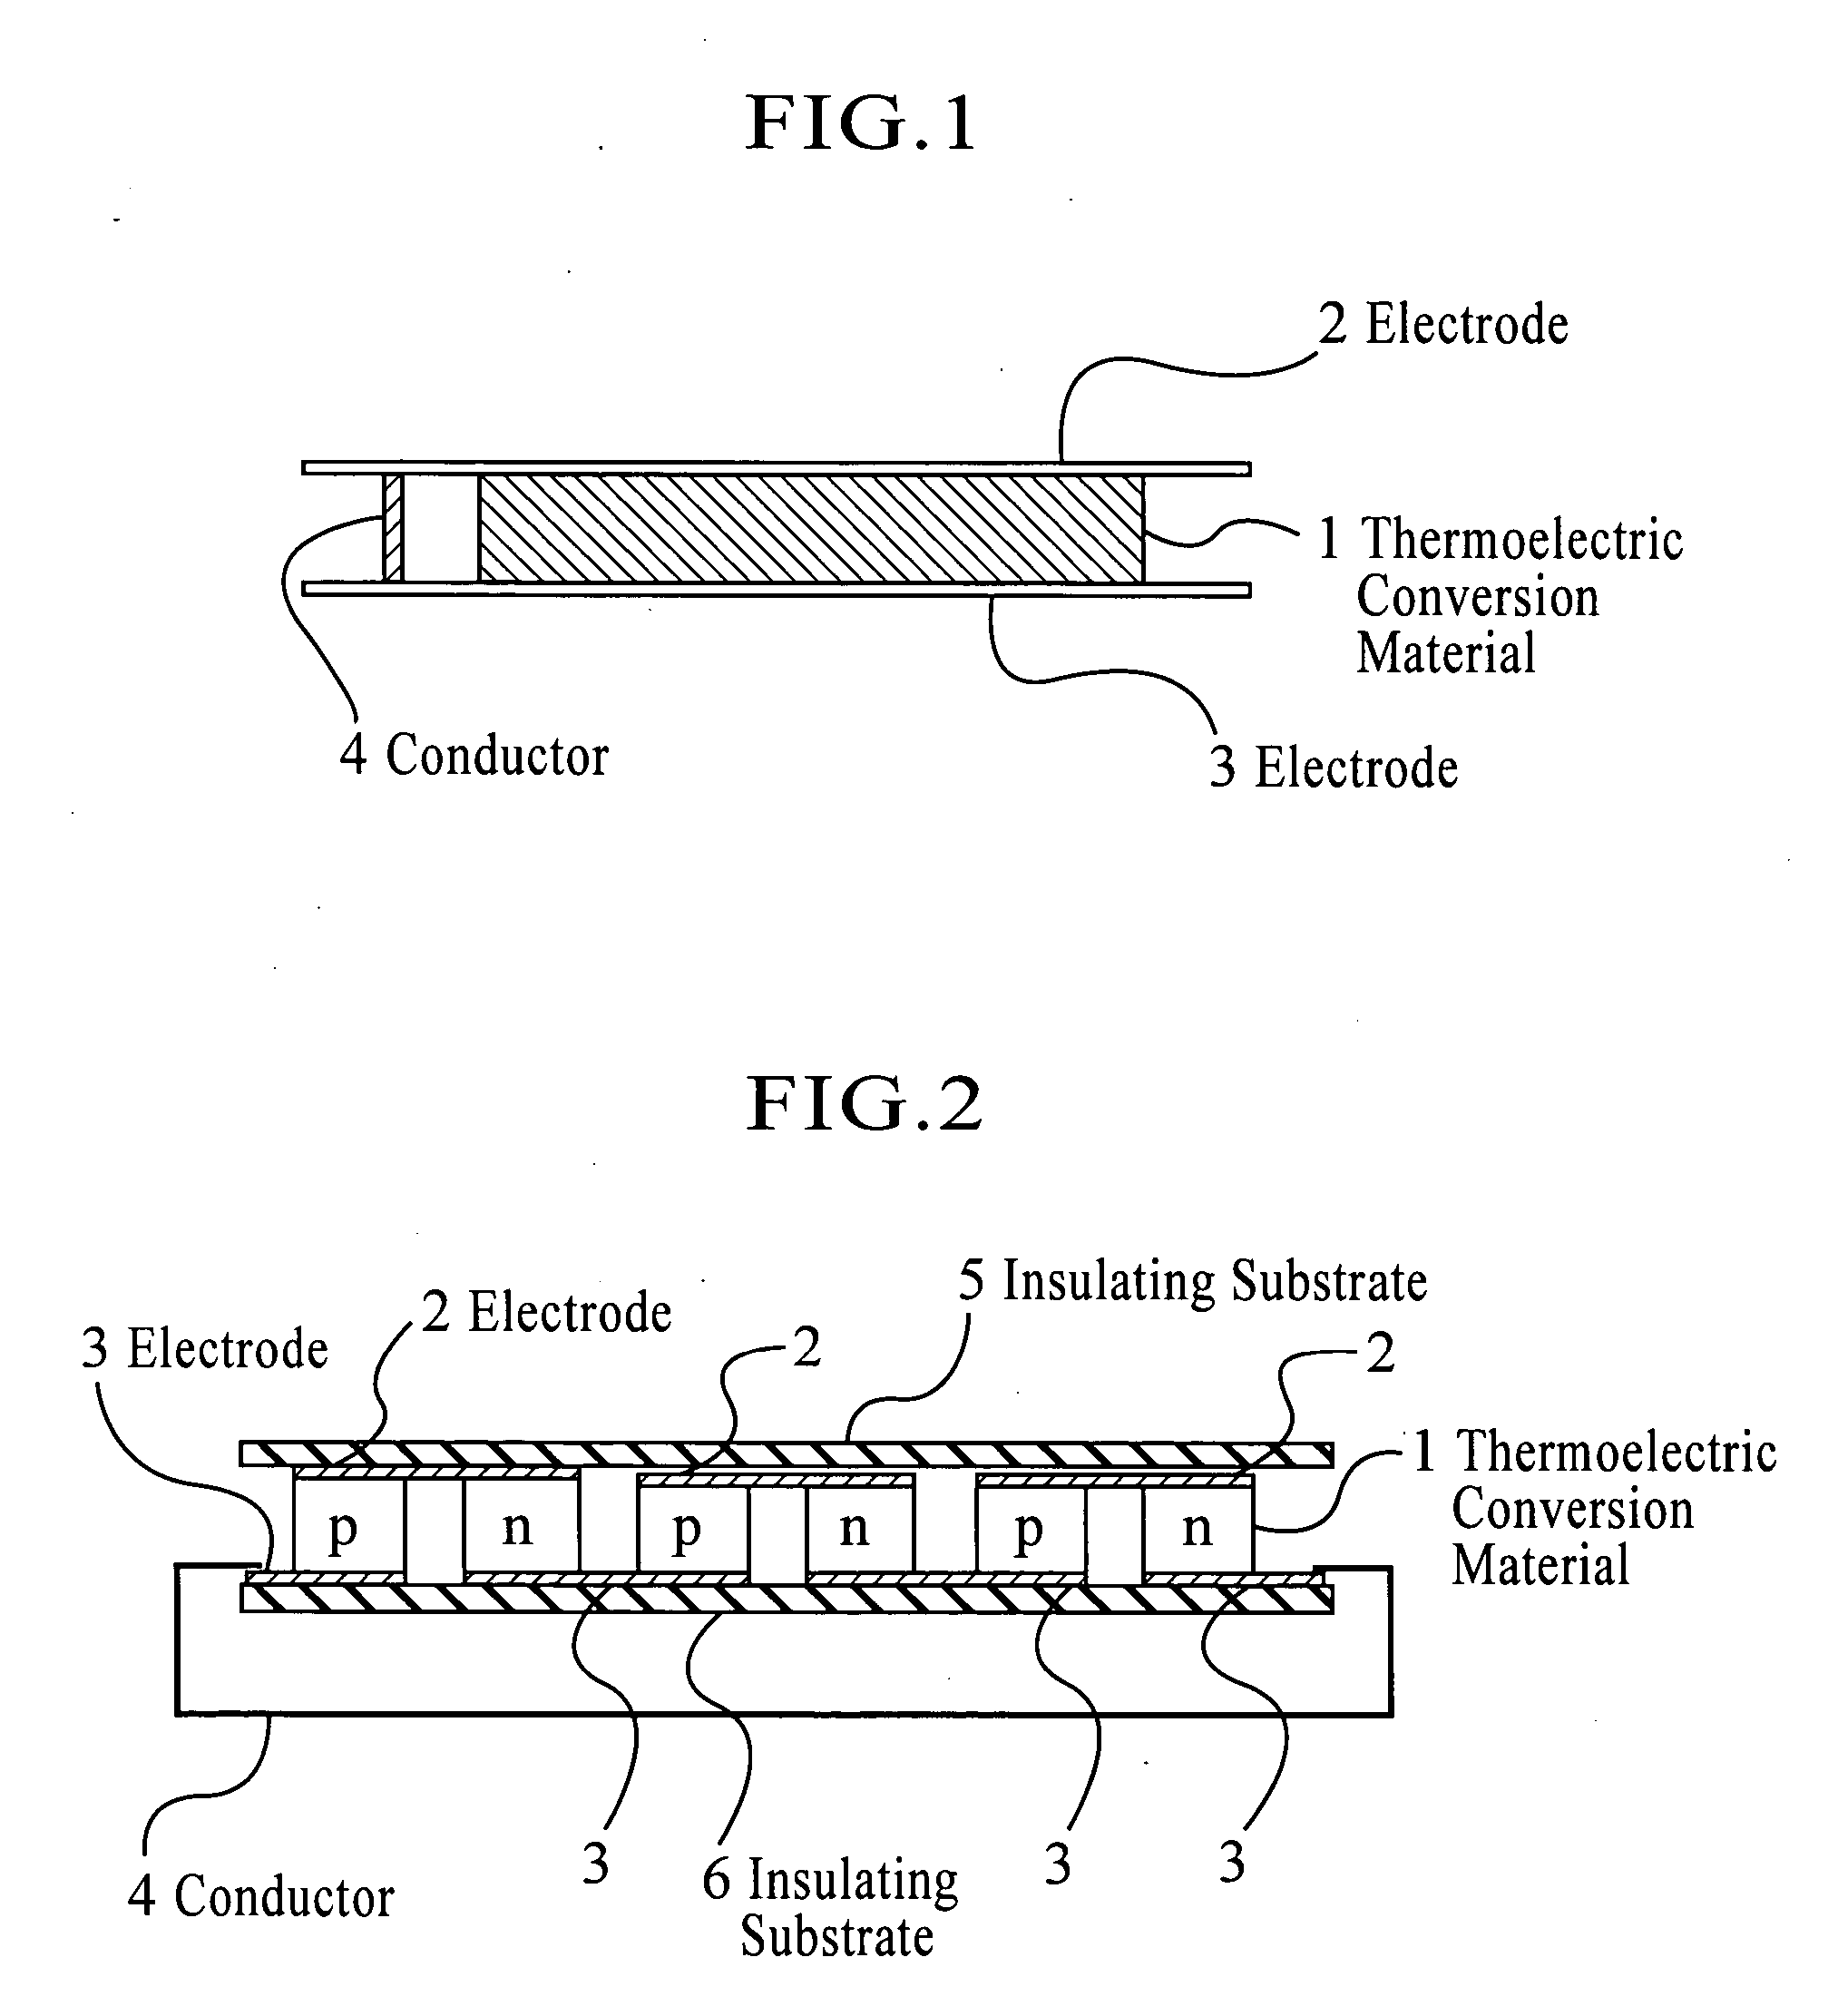 Cooling device for electronic component using thermo-electric conversion material